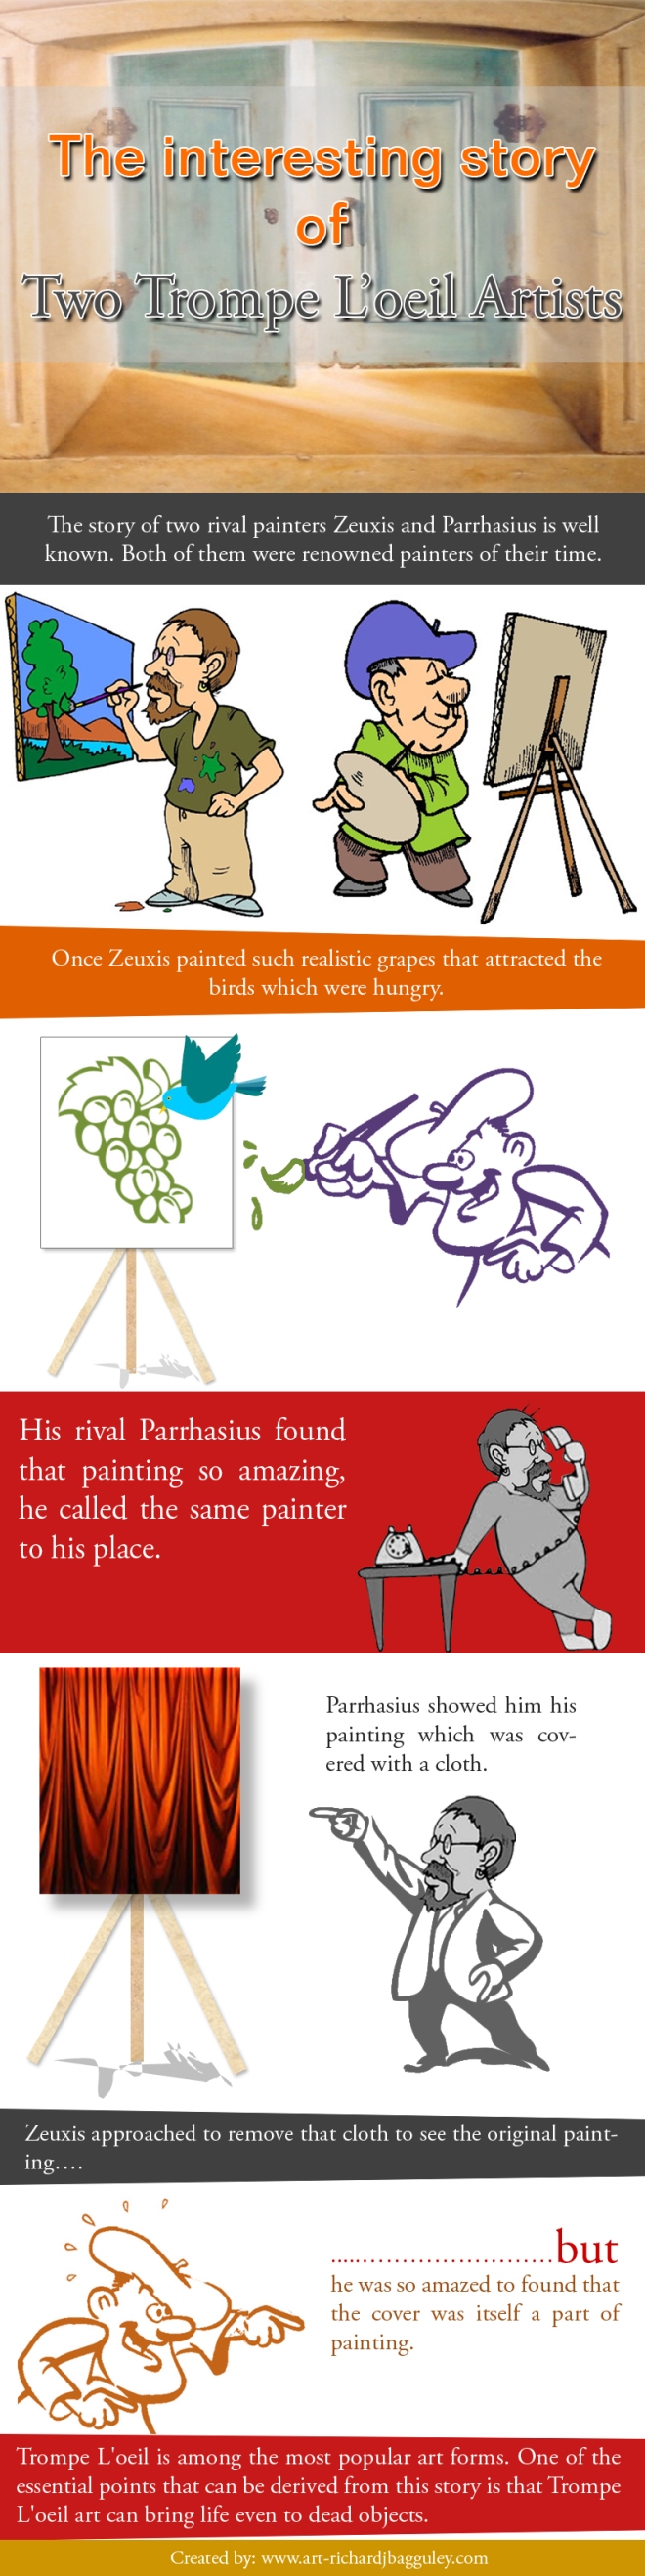 Story of two painters